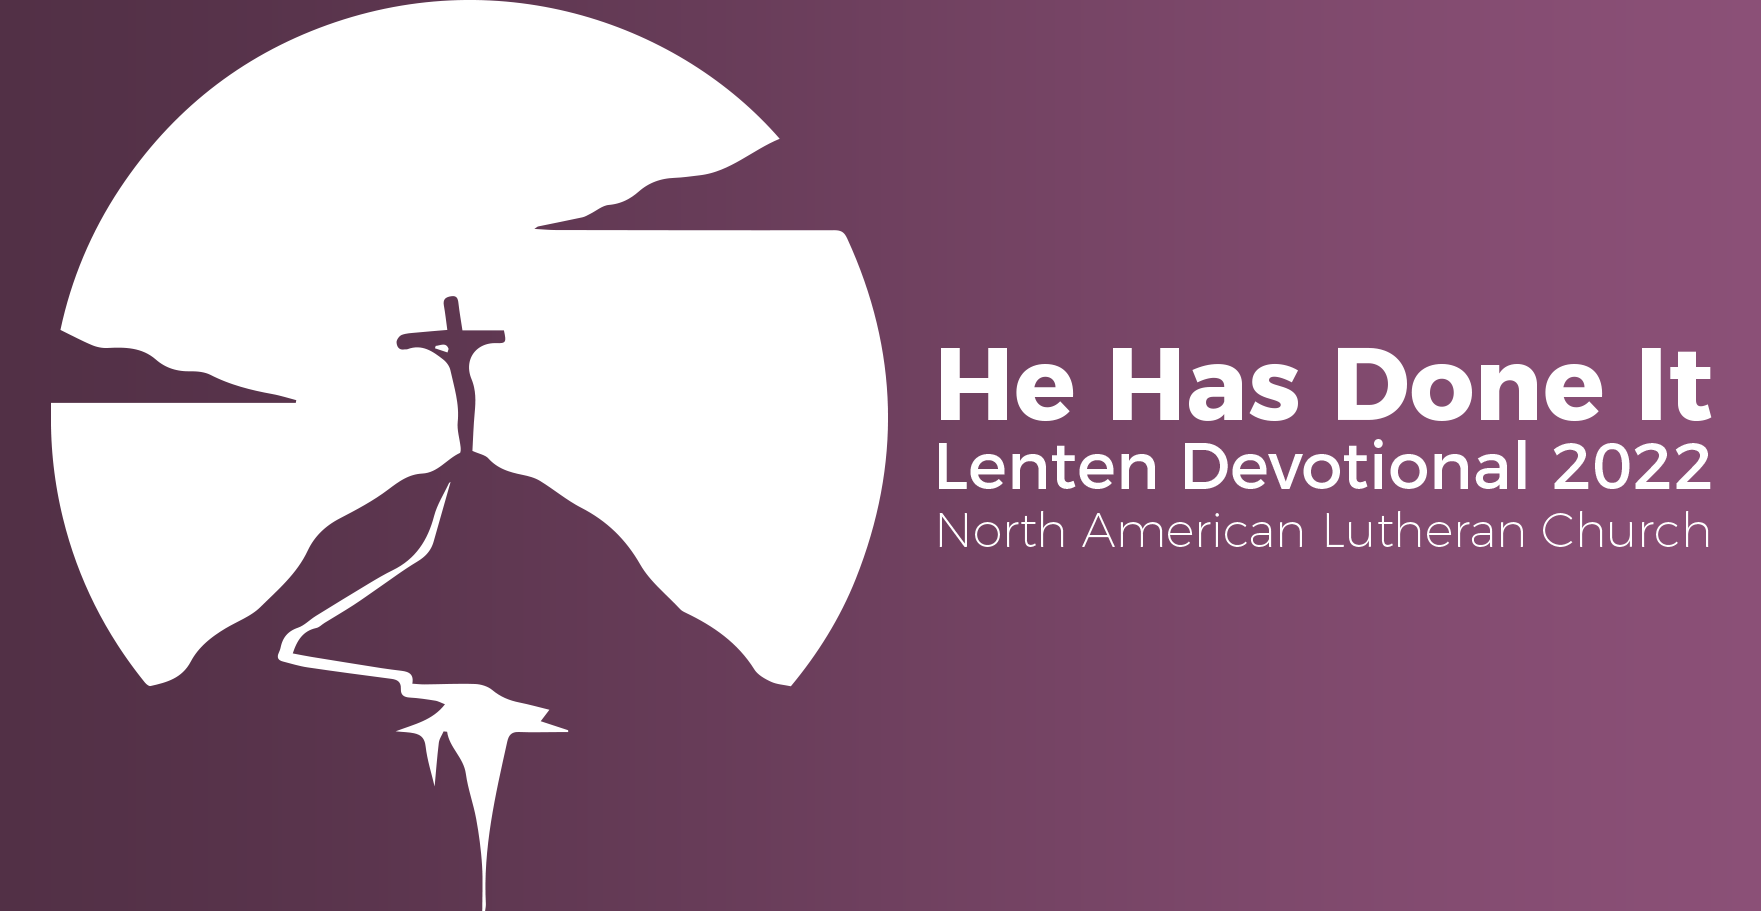 March 19, 2022 | Saturday of the Week of Lent II